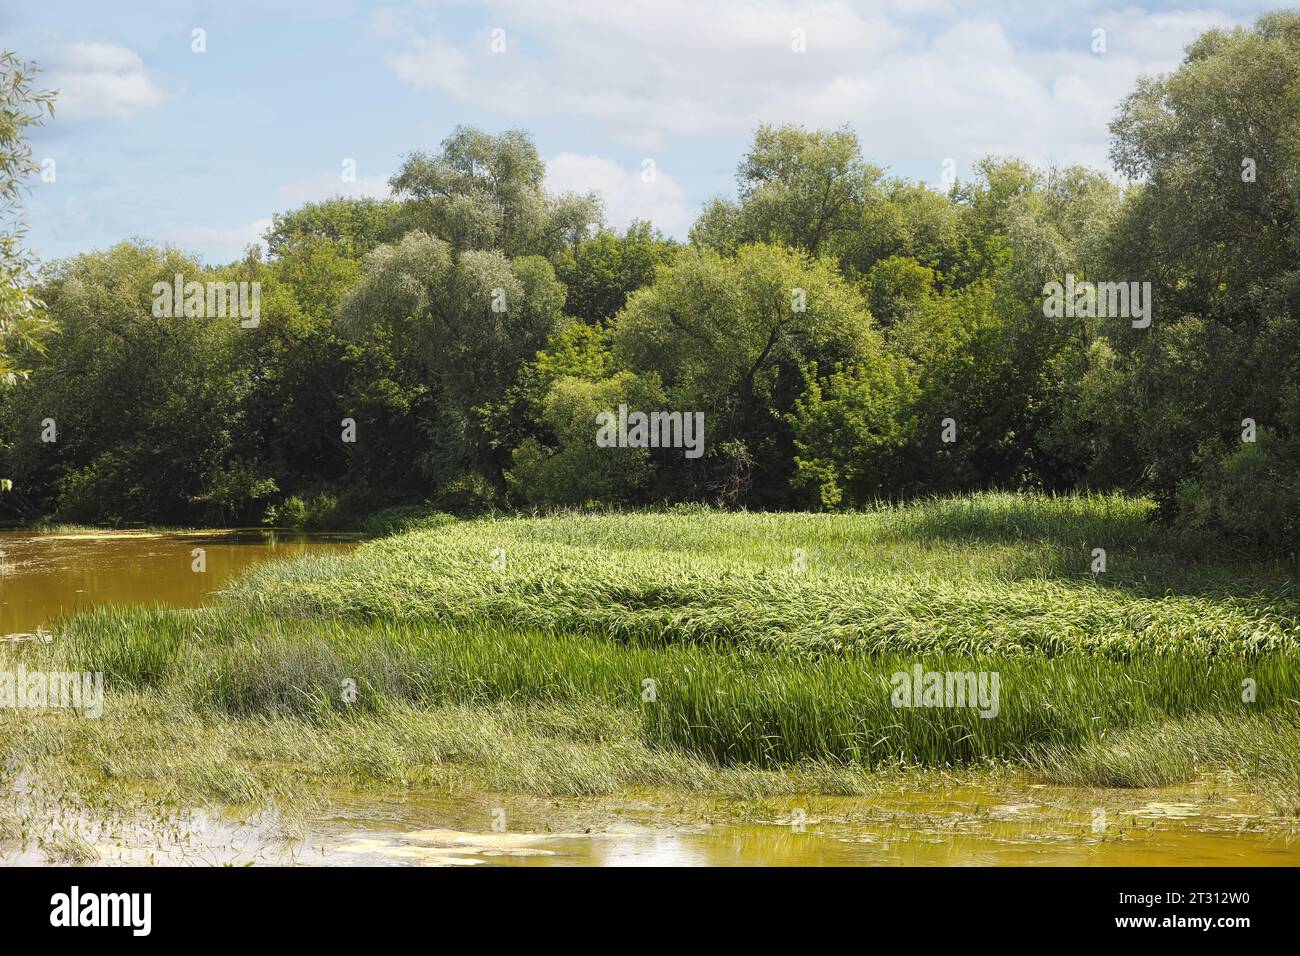 Summer landscape with river, trees, sky and tall sedge family grasses growing in the river. Stock Photo